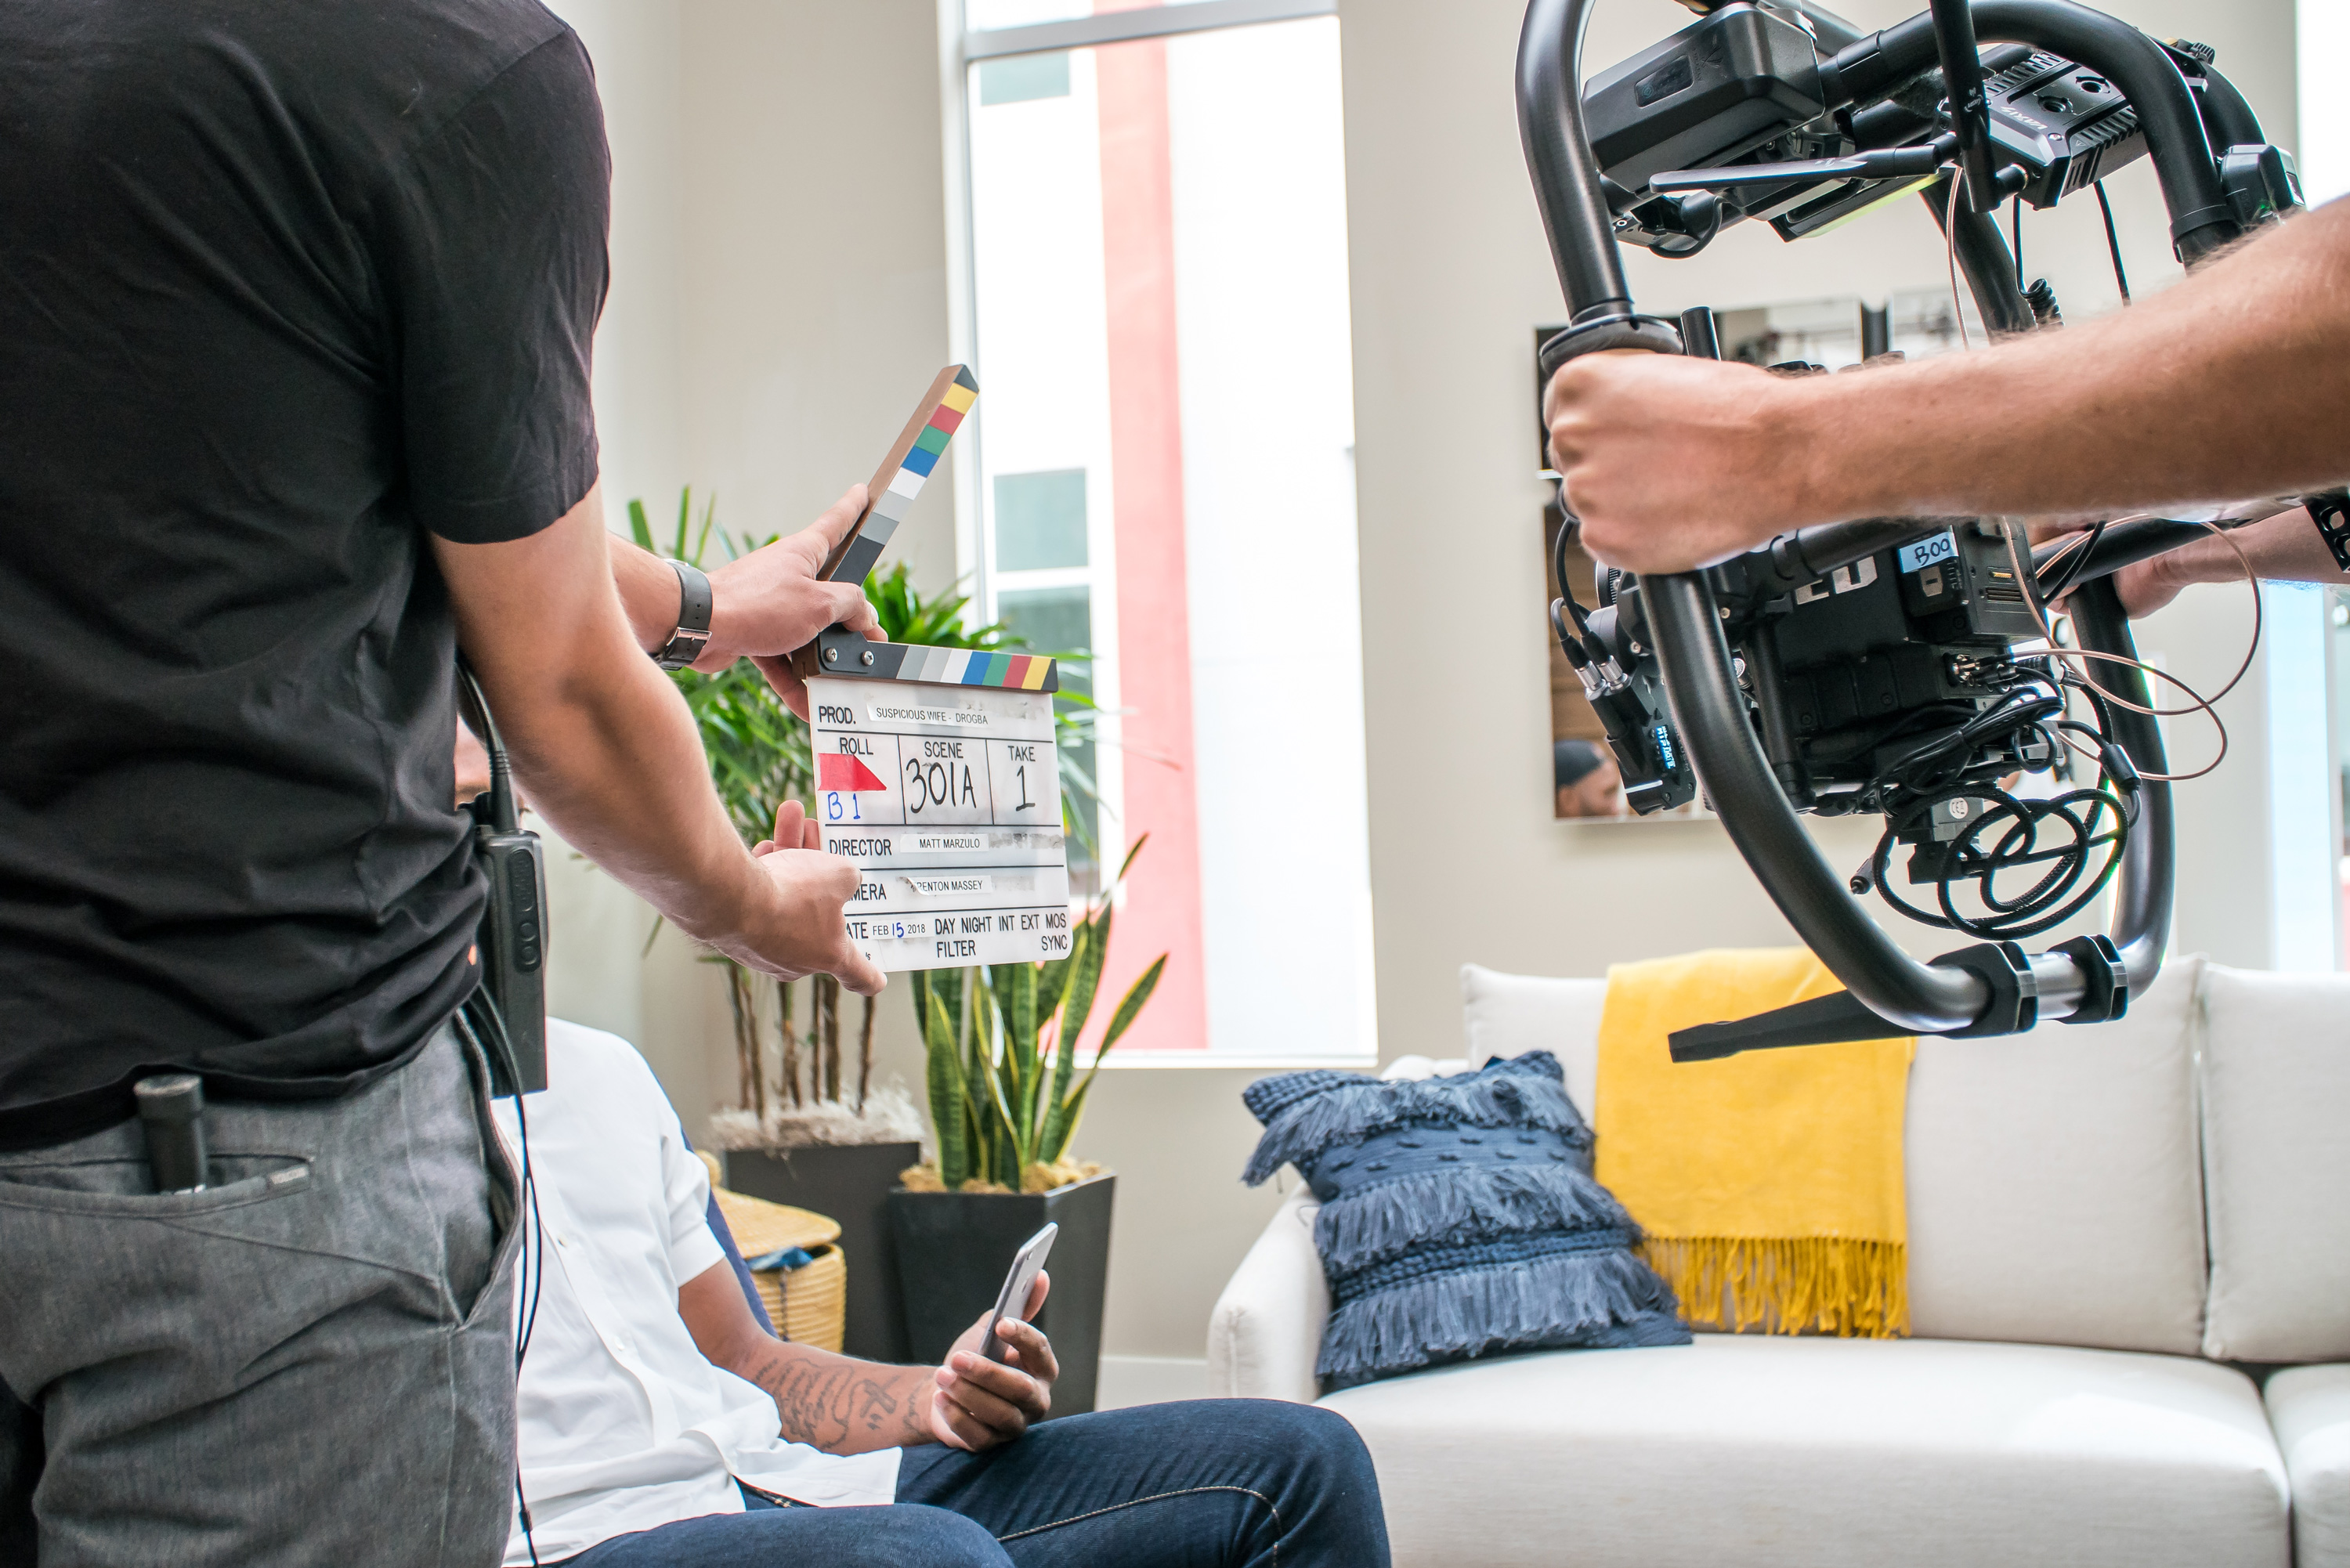 How to make the most of your video production budget